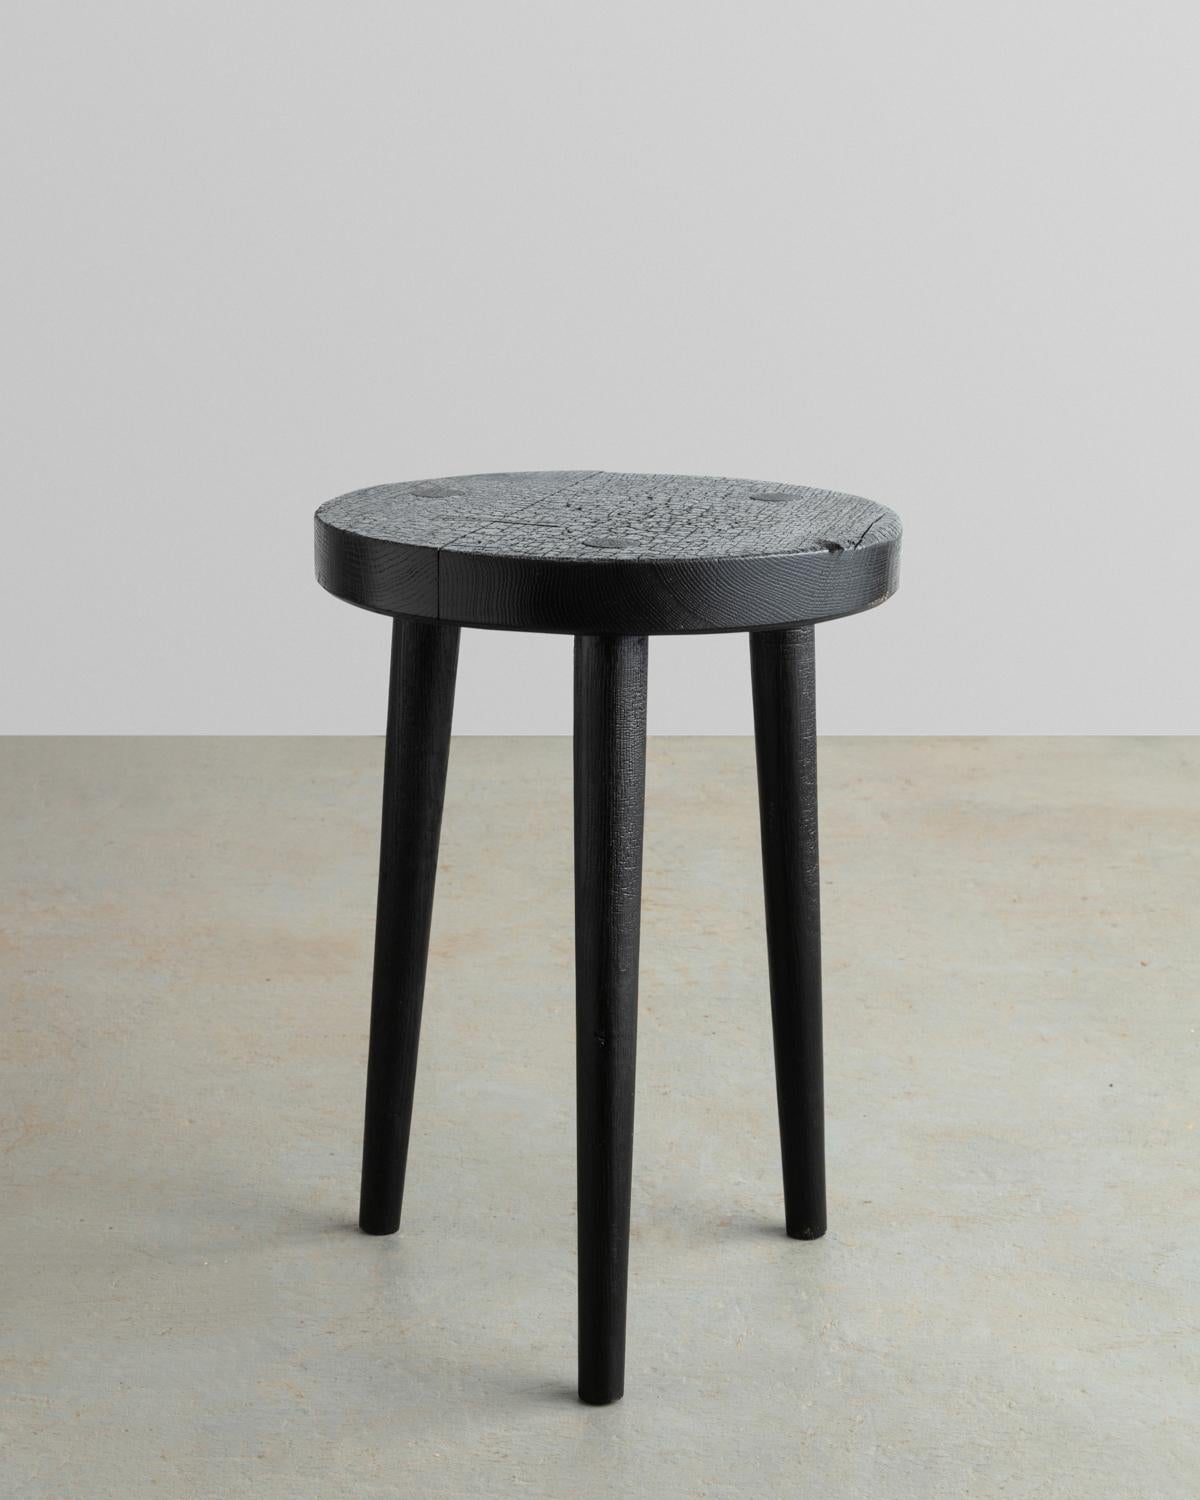 Designed and constructed from solid Oak this three-legged stool features hand chiseled solid Oak butterfly joinery to solidify its top surface. Staying true to traditional techniques the stool is charred with a blowtorch to preserve its authentic